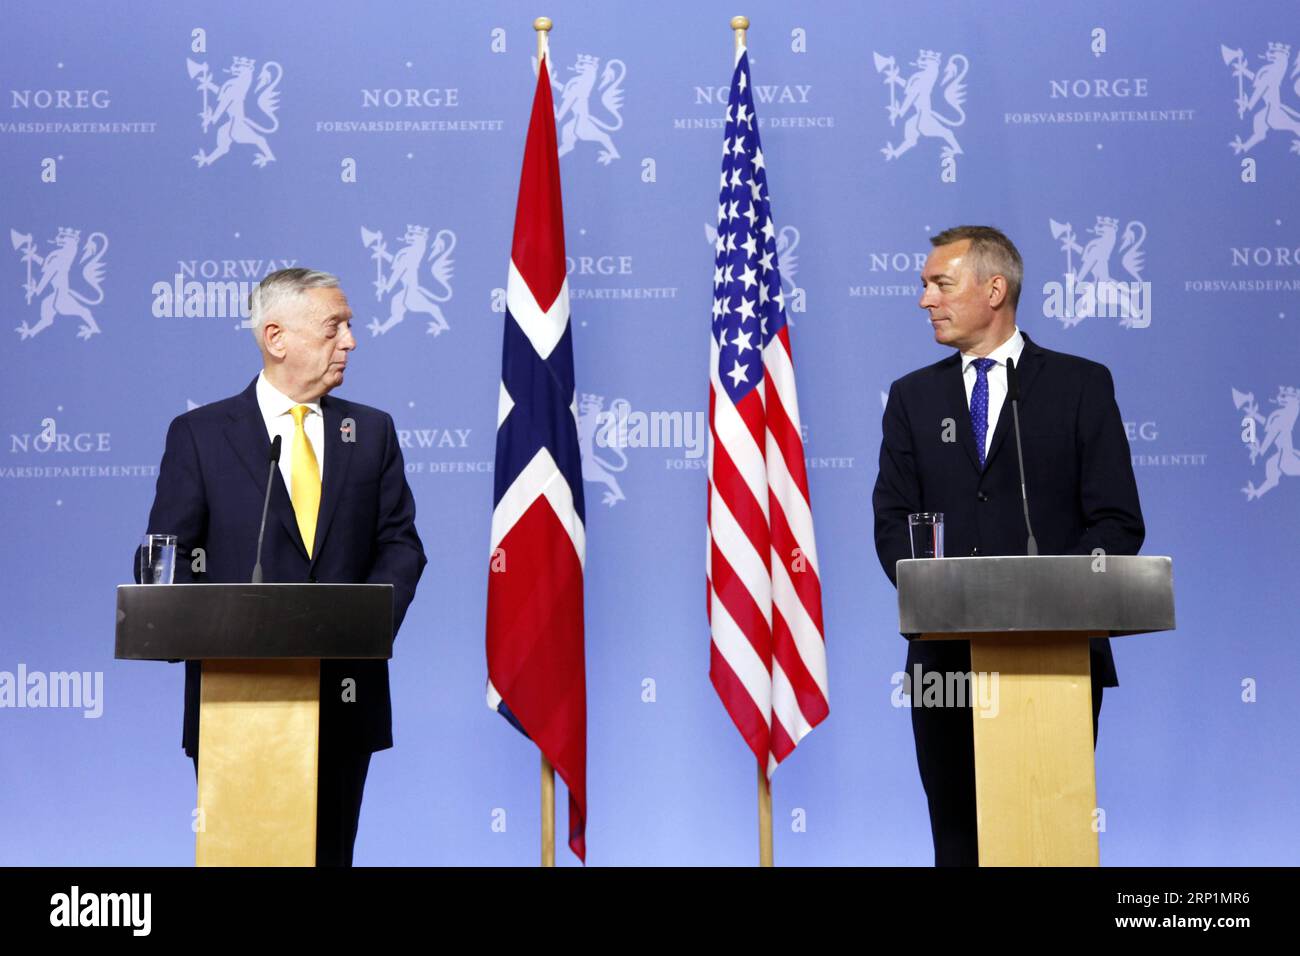 (180714) -- OSLO, July 14, 2018 -- U.S. Secretary of Defense James Mattis (L) attends a joint press conference with Norwegian Minister of Defence Frank Bakke-Jensen in Oslo, Norway, July 14, 2018. Norway on Saturday reconfirmed its commitment to gradually increase defense spending to two percent of GDP in the North Atlantic Treaty Organization (NATO) during a visit by U.S. Secretary of Defense James Mattis to the Nordic country. ) NORWAY-OSLO-U.S.-DEFENSE MINISTER-VISIT LiangxYouchang PUBLICATIONxNOTxINxCHN Stock Photo